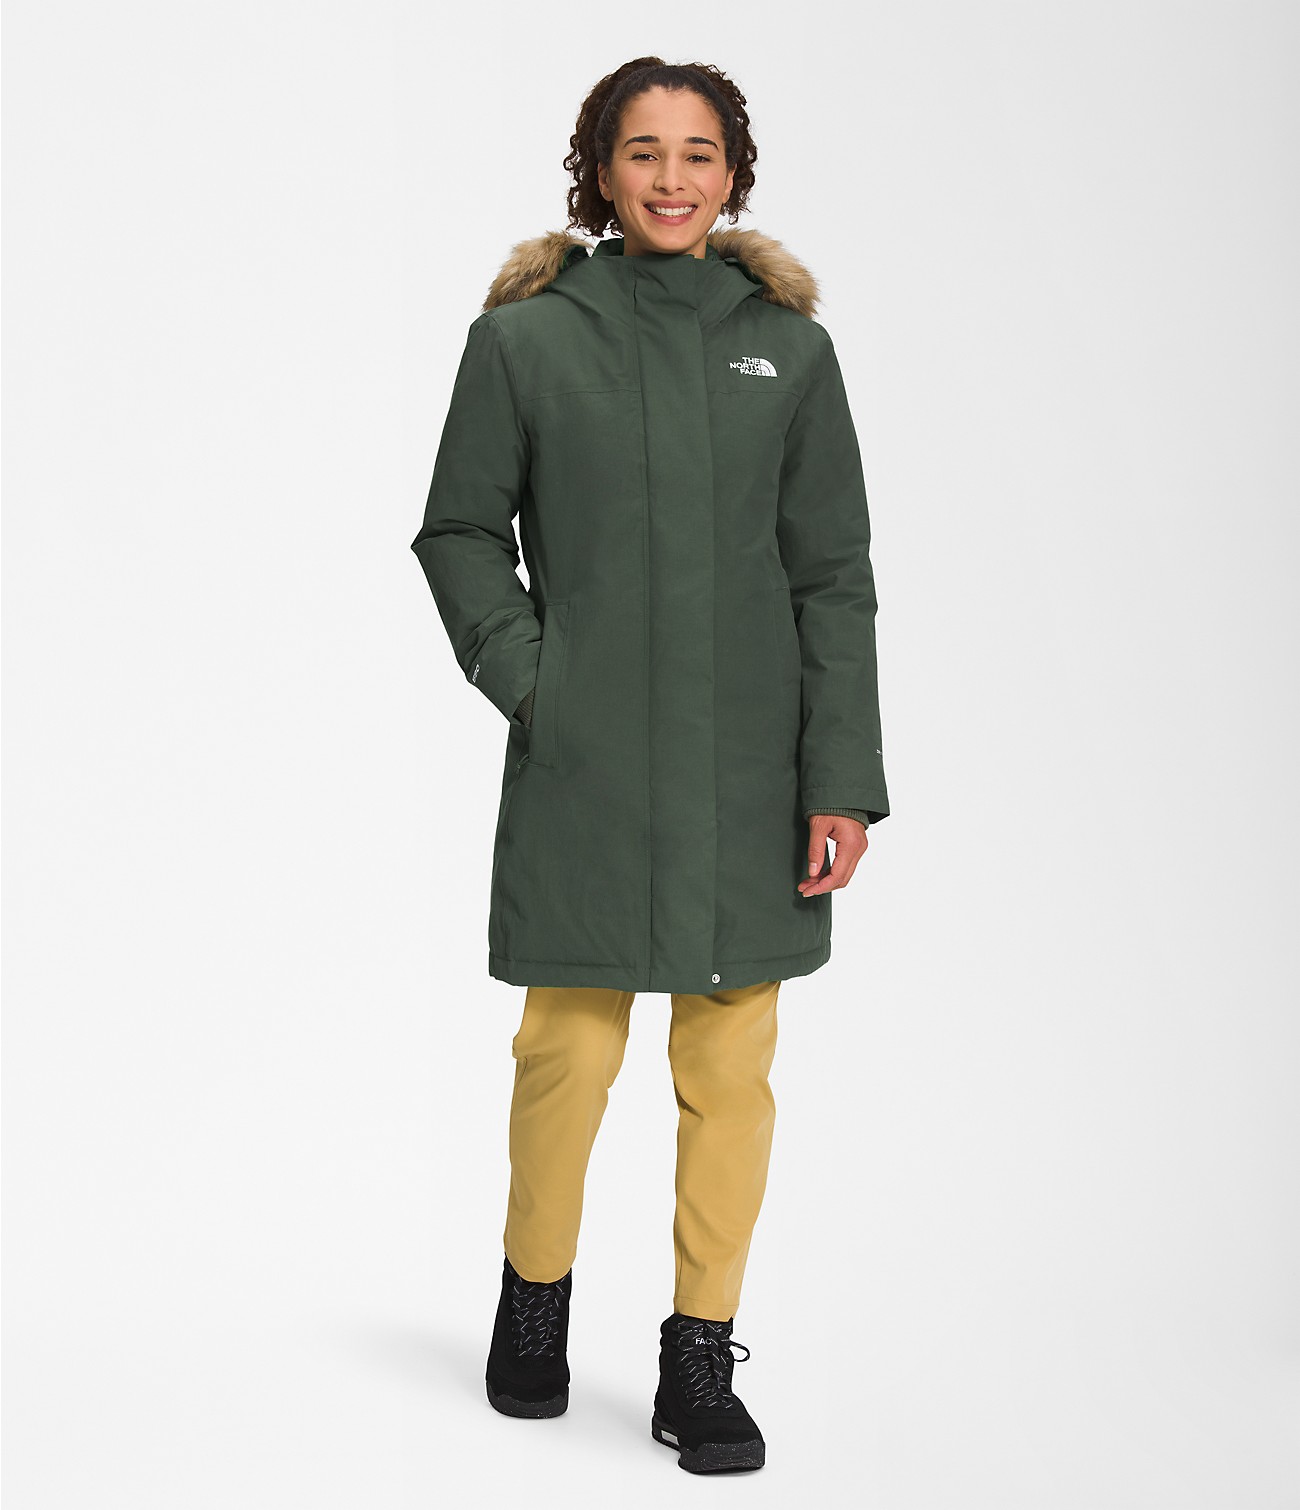 Unlock Wilderness' choice in the L.L.Bean Vs North Face comparison, the Arctic Parka by The North Face